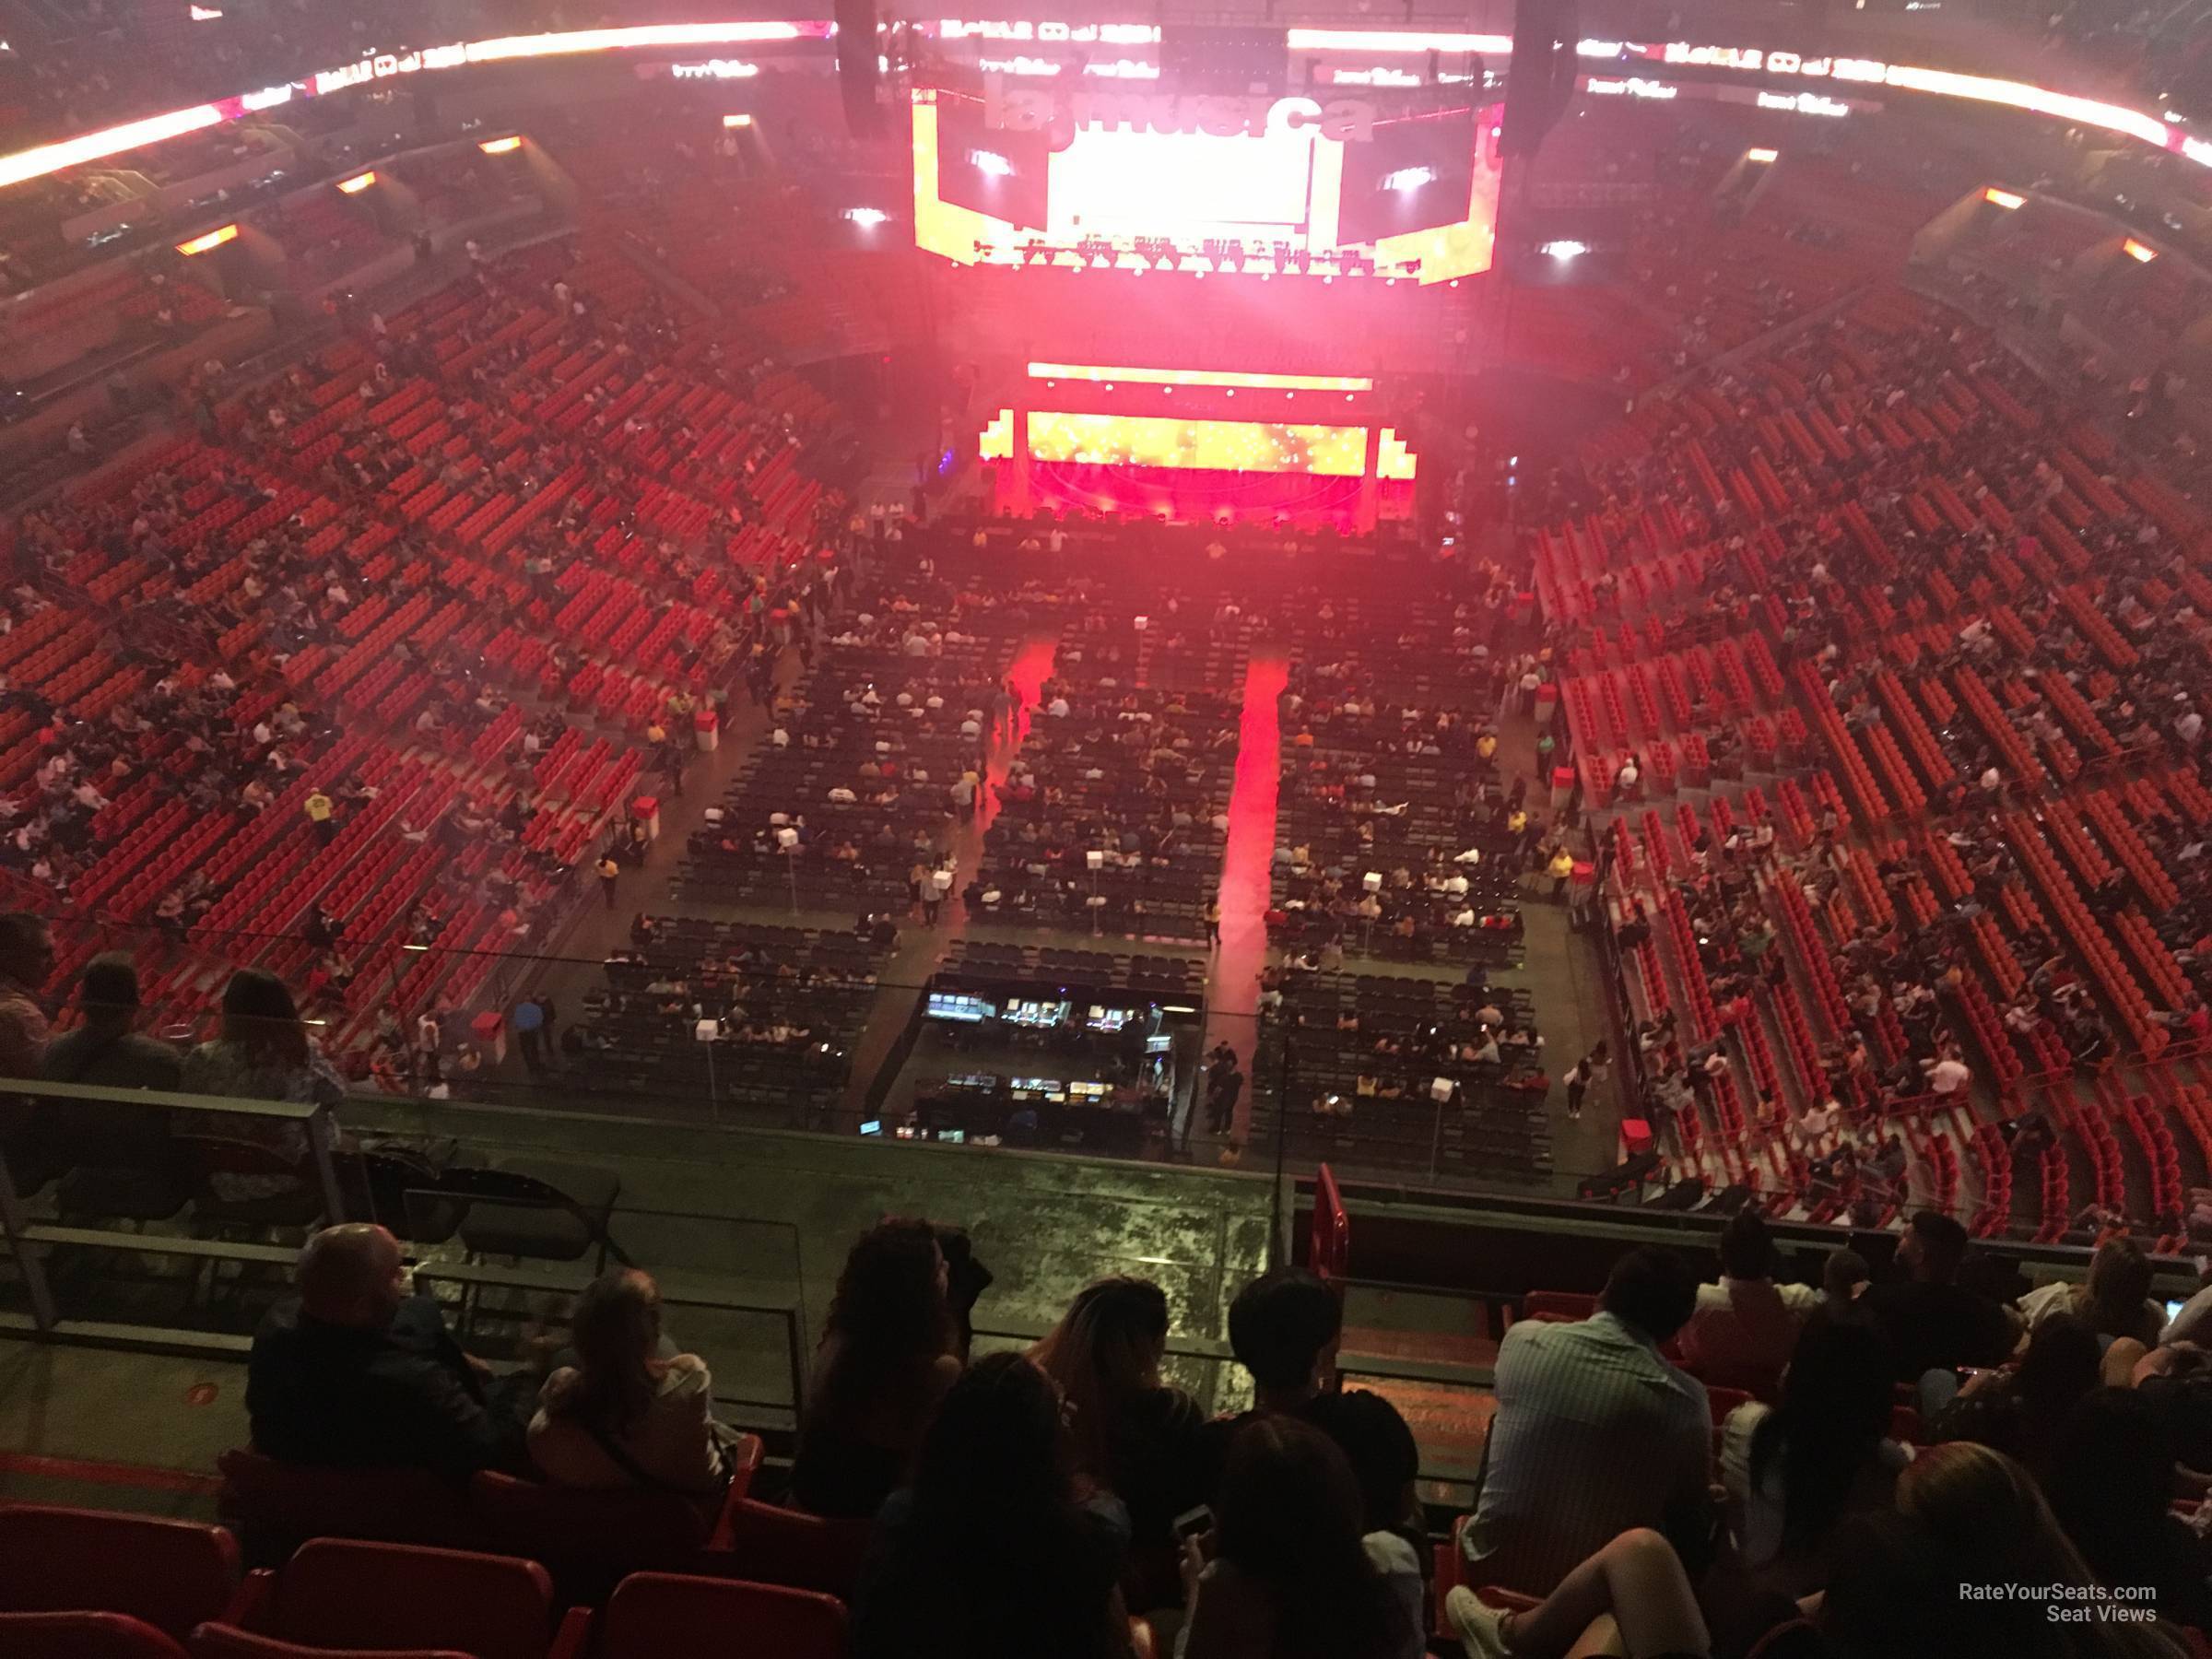 section 415, row 10 seat view  for concert - ftx arena